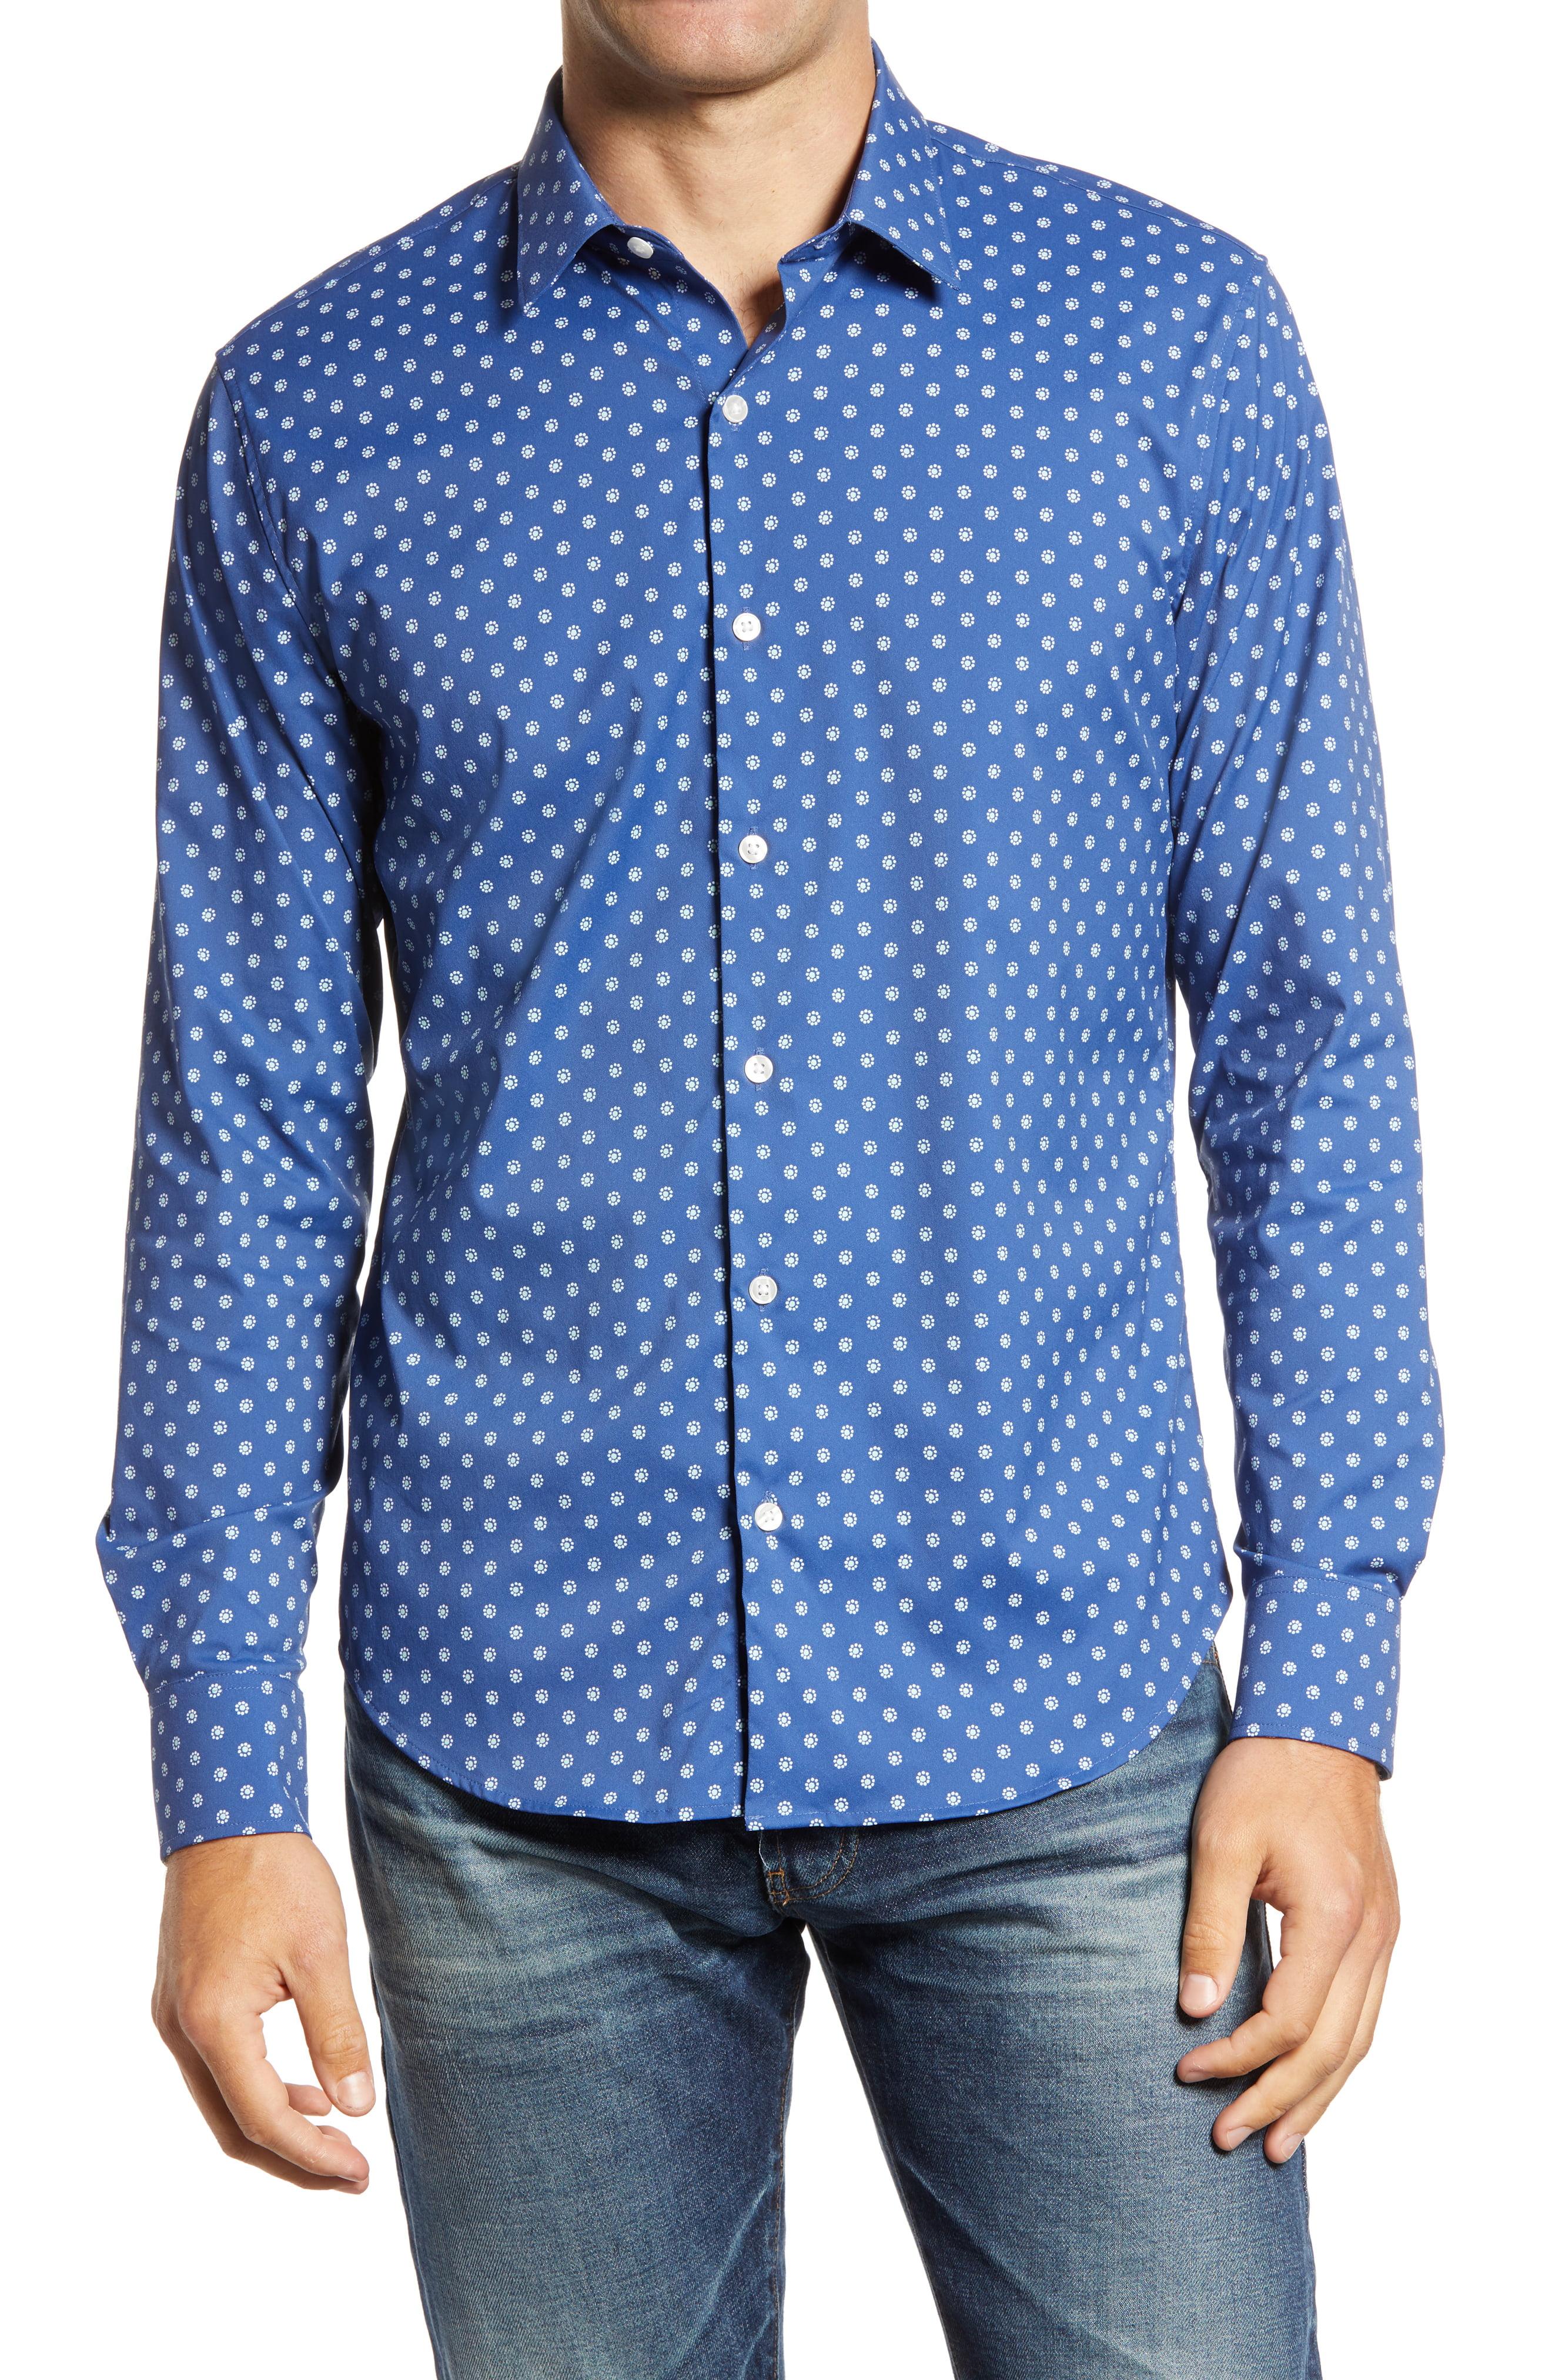 Bonobos Slim Fit Floral Button-up Performance Shirt in Blue for Men - Lyst